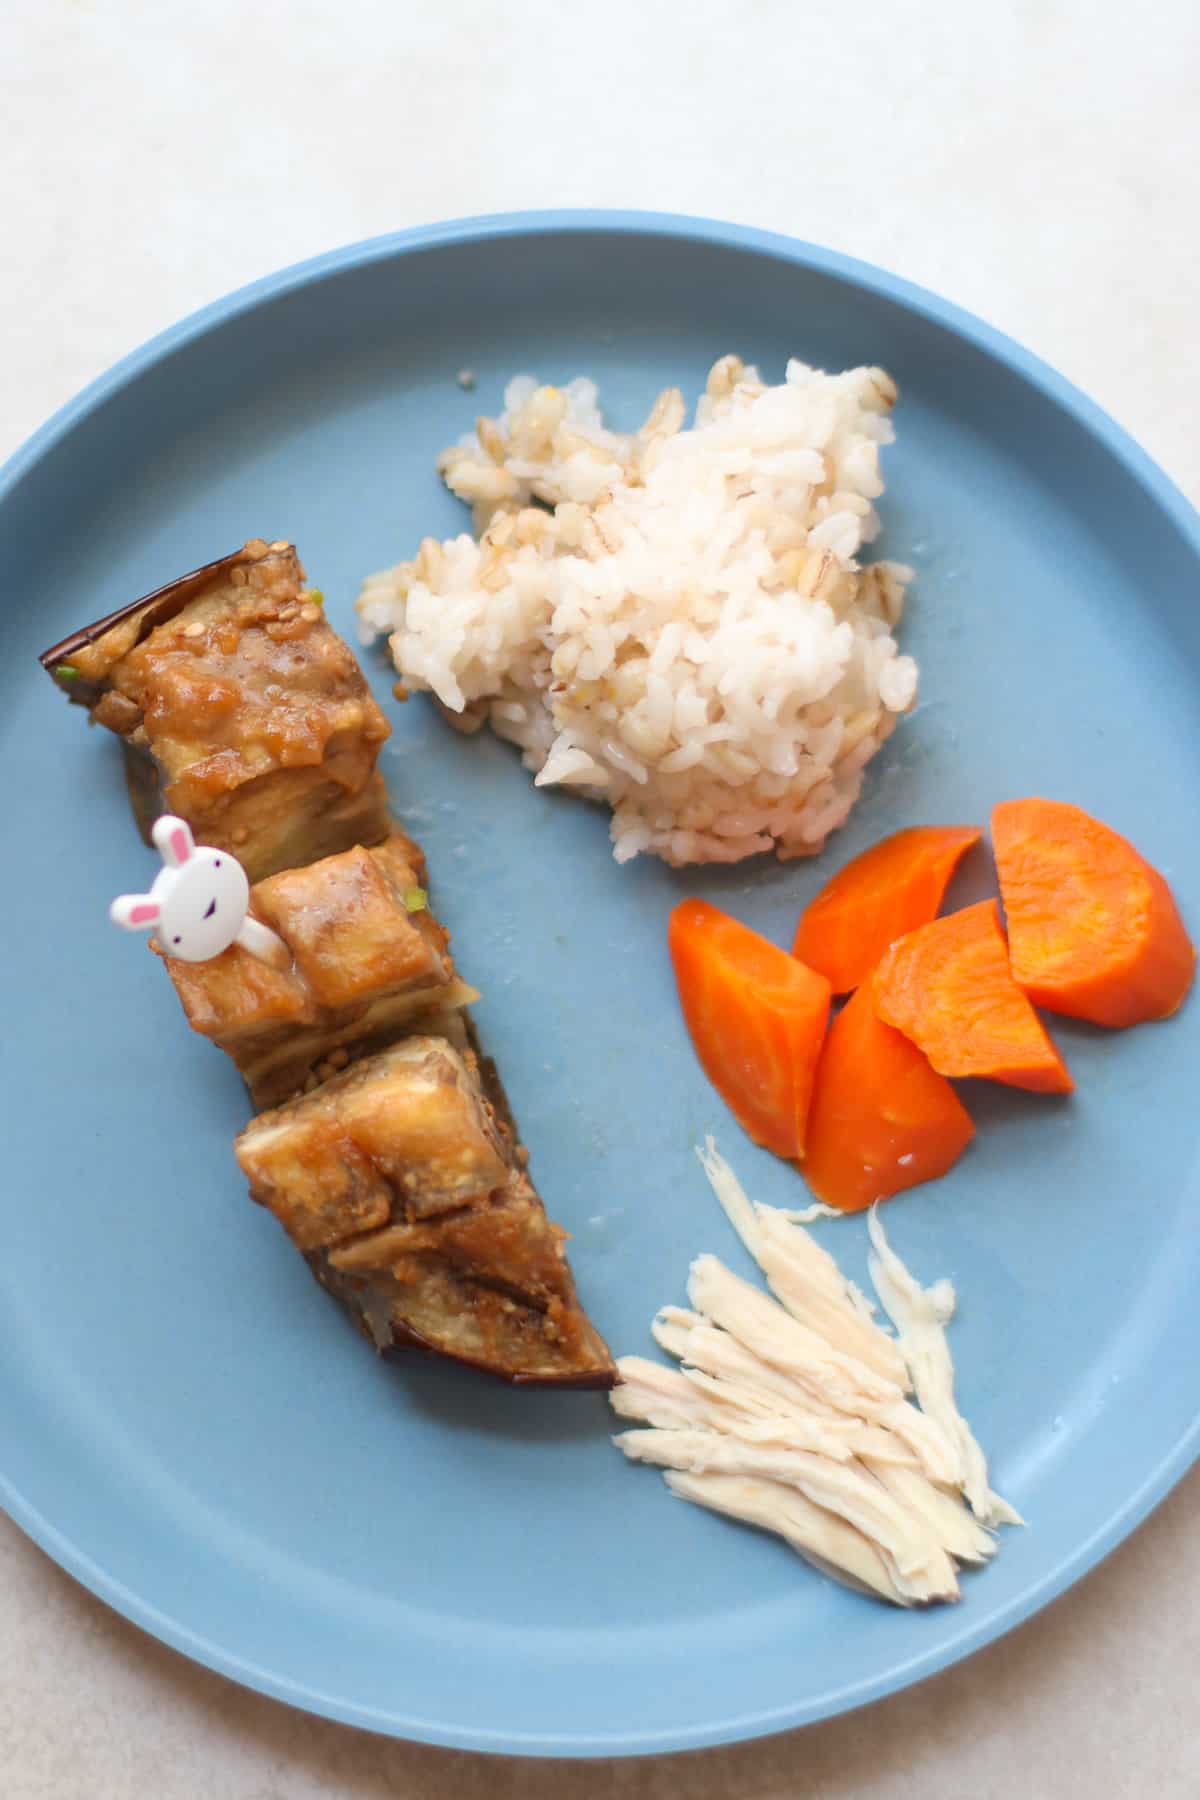 A toddler's plate with a strip of miso aubergine, rice, carrots, and chicken.